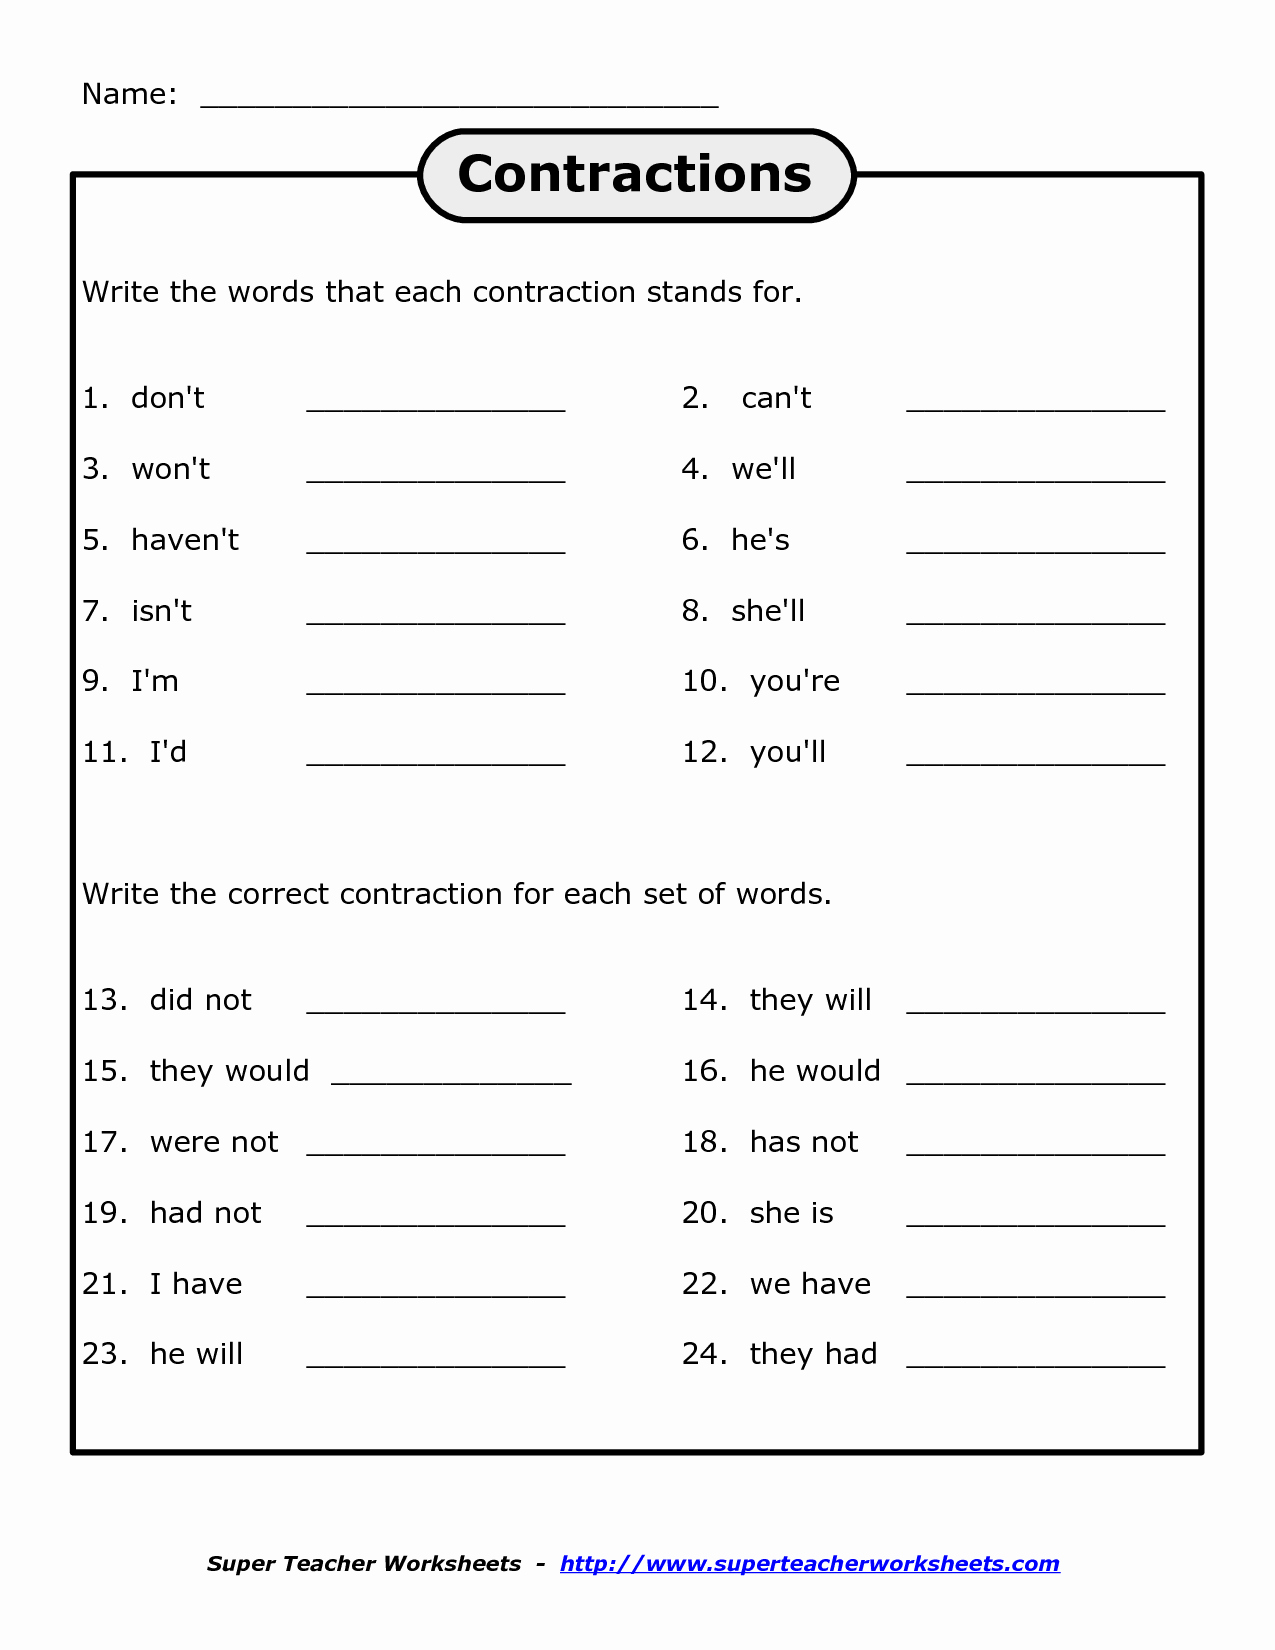 Contractions Worksheet 2nd Grade New Free Printables for 4th Grade Science